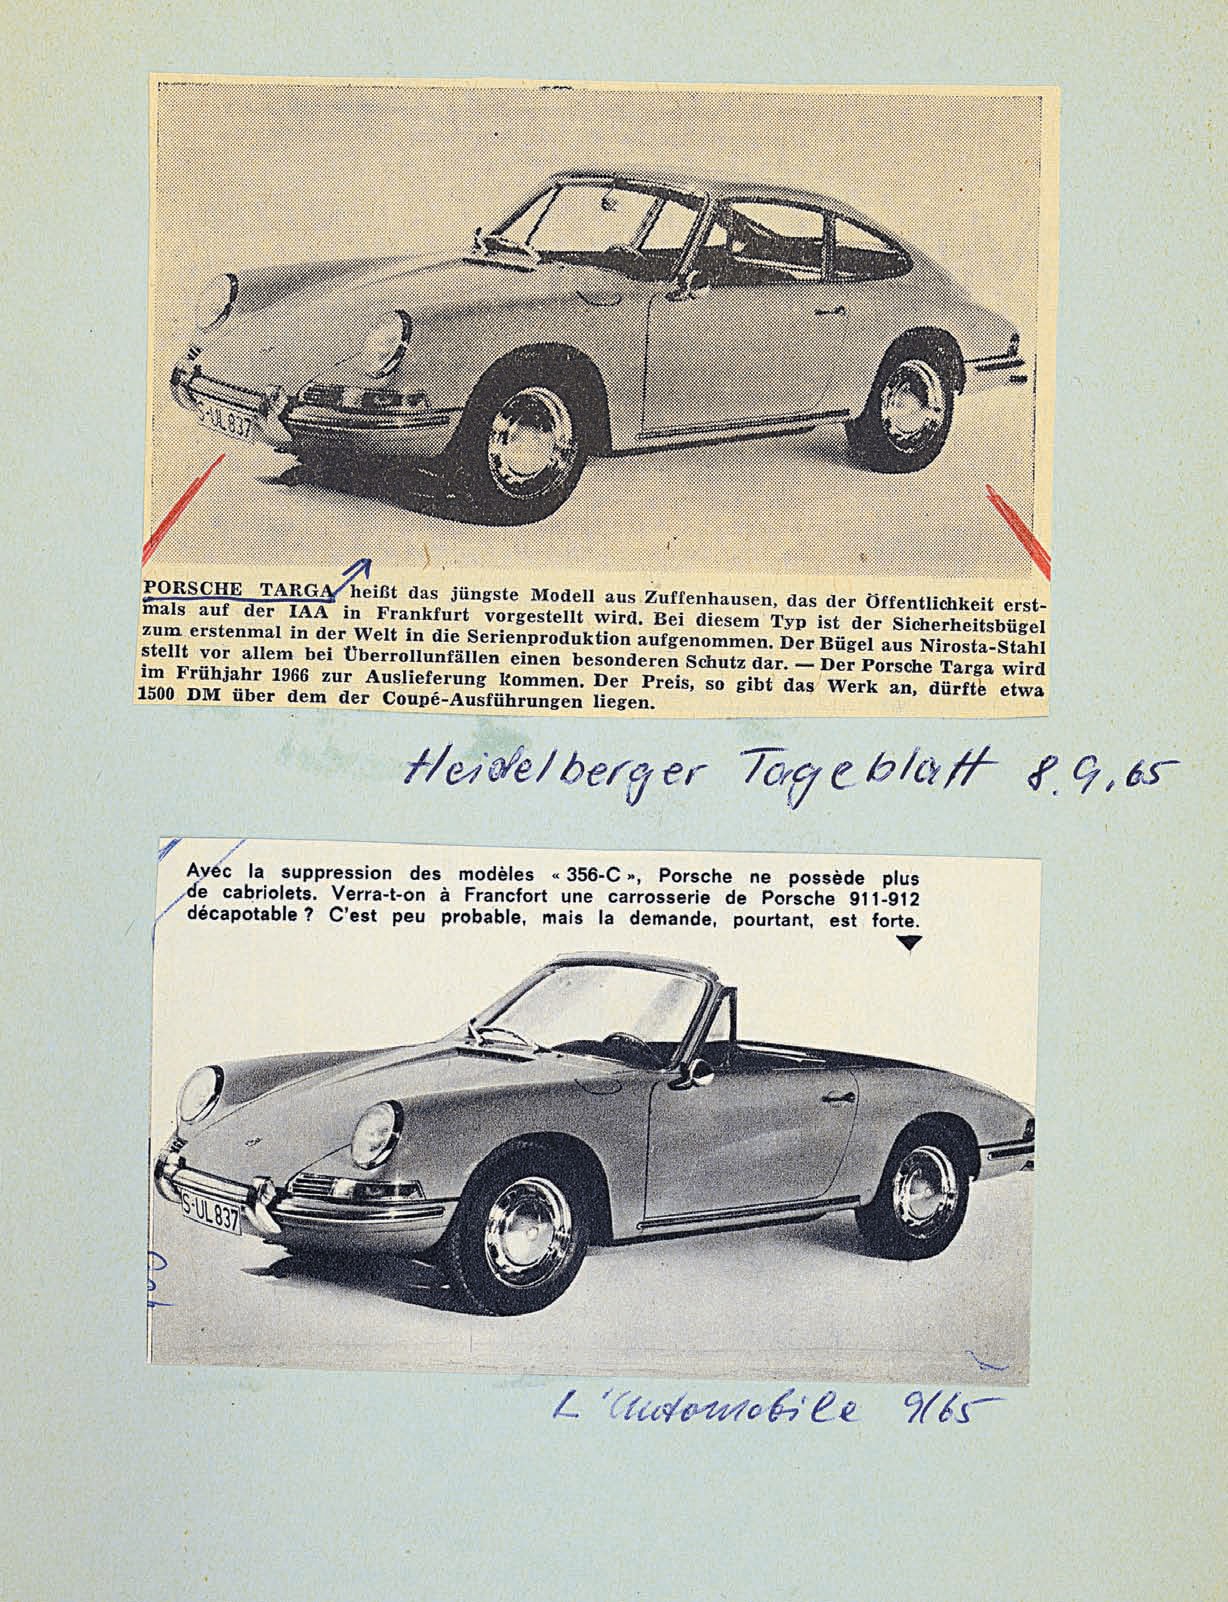 The September 1965 issue of L’Automobile published this single photo with a caption that read, “With the end of the 356C models, Porsche had no cabriolets. Will we see at Frankfurt a Porsche 911–912 convertible? It’s unlikely but the demand, however, is strong.” Porsche Archiv 